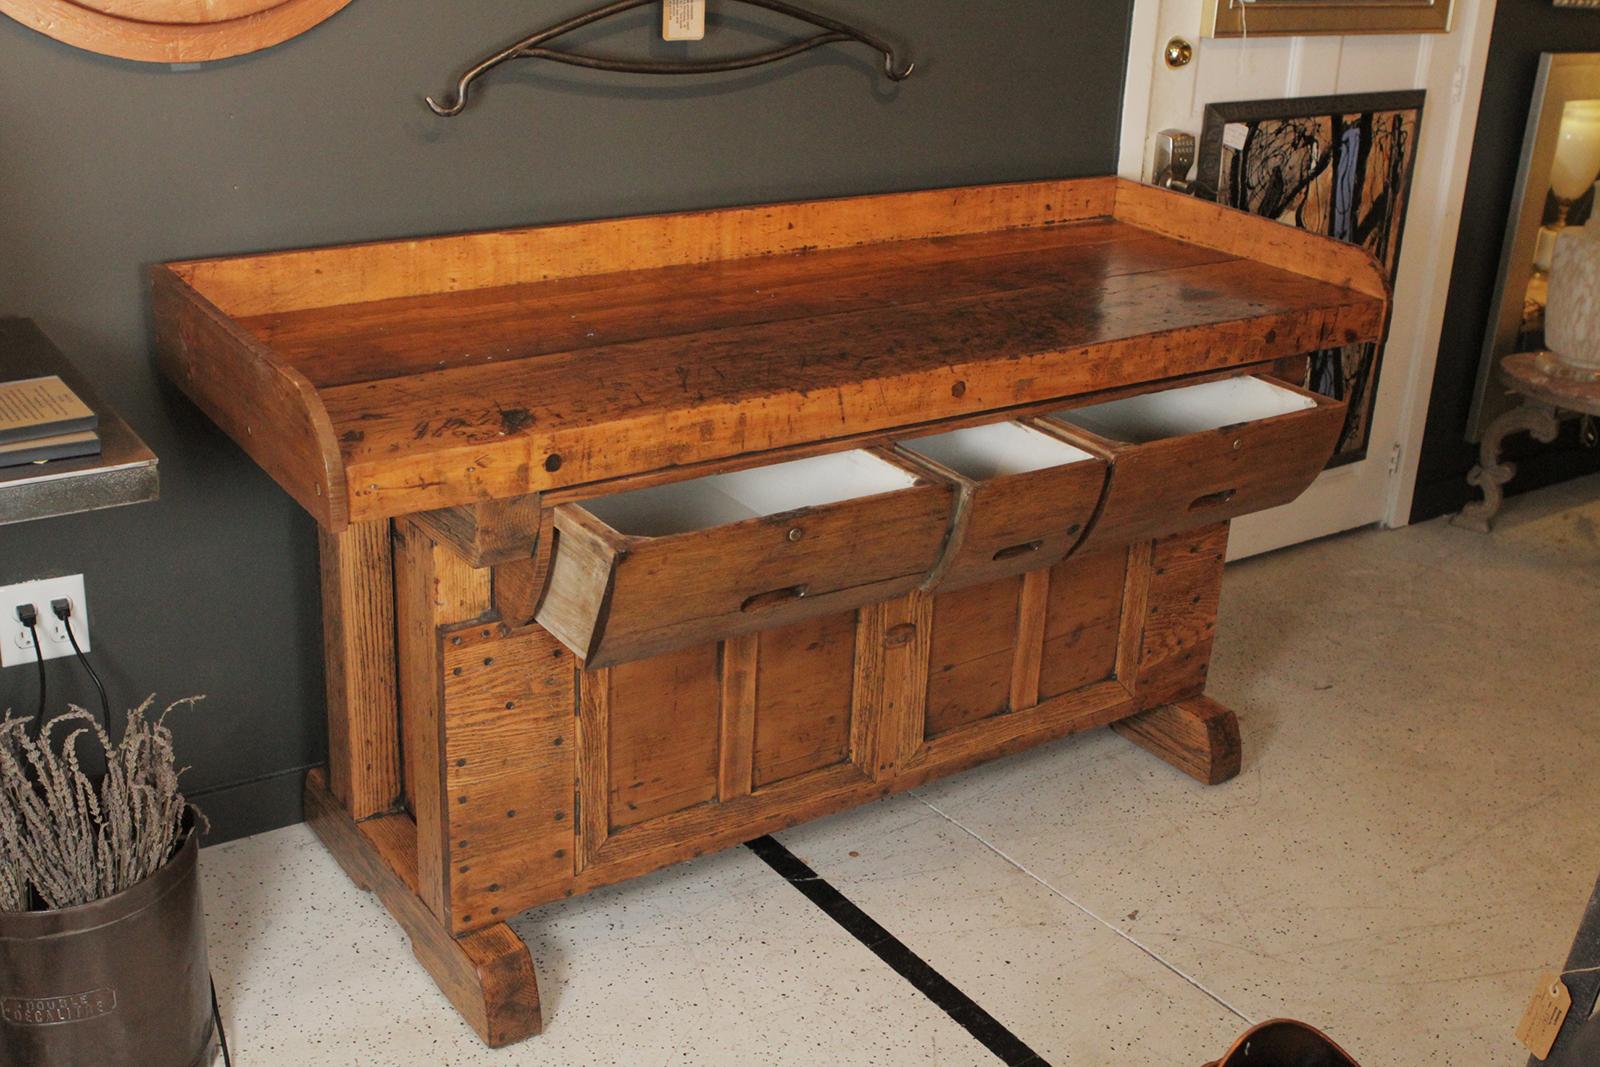 Antique carpenters work bench with drawers and cabinet storage expertly refinished with a mellow waxed finish. Dimensions 65” L x 25” D x 32” H.